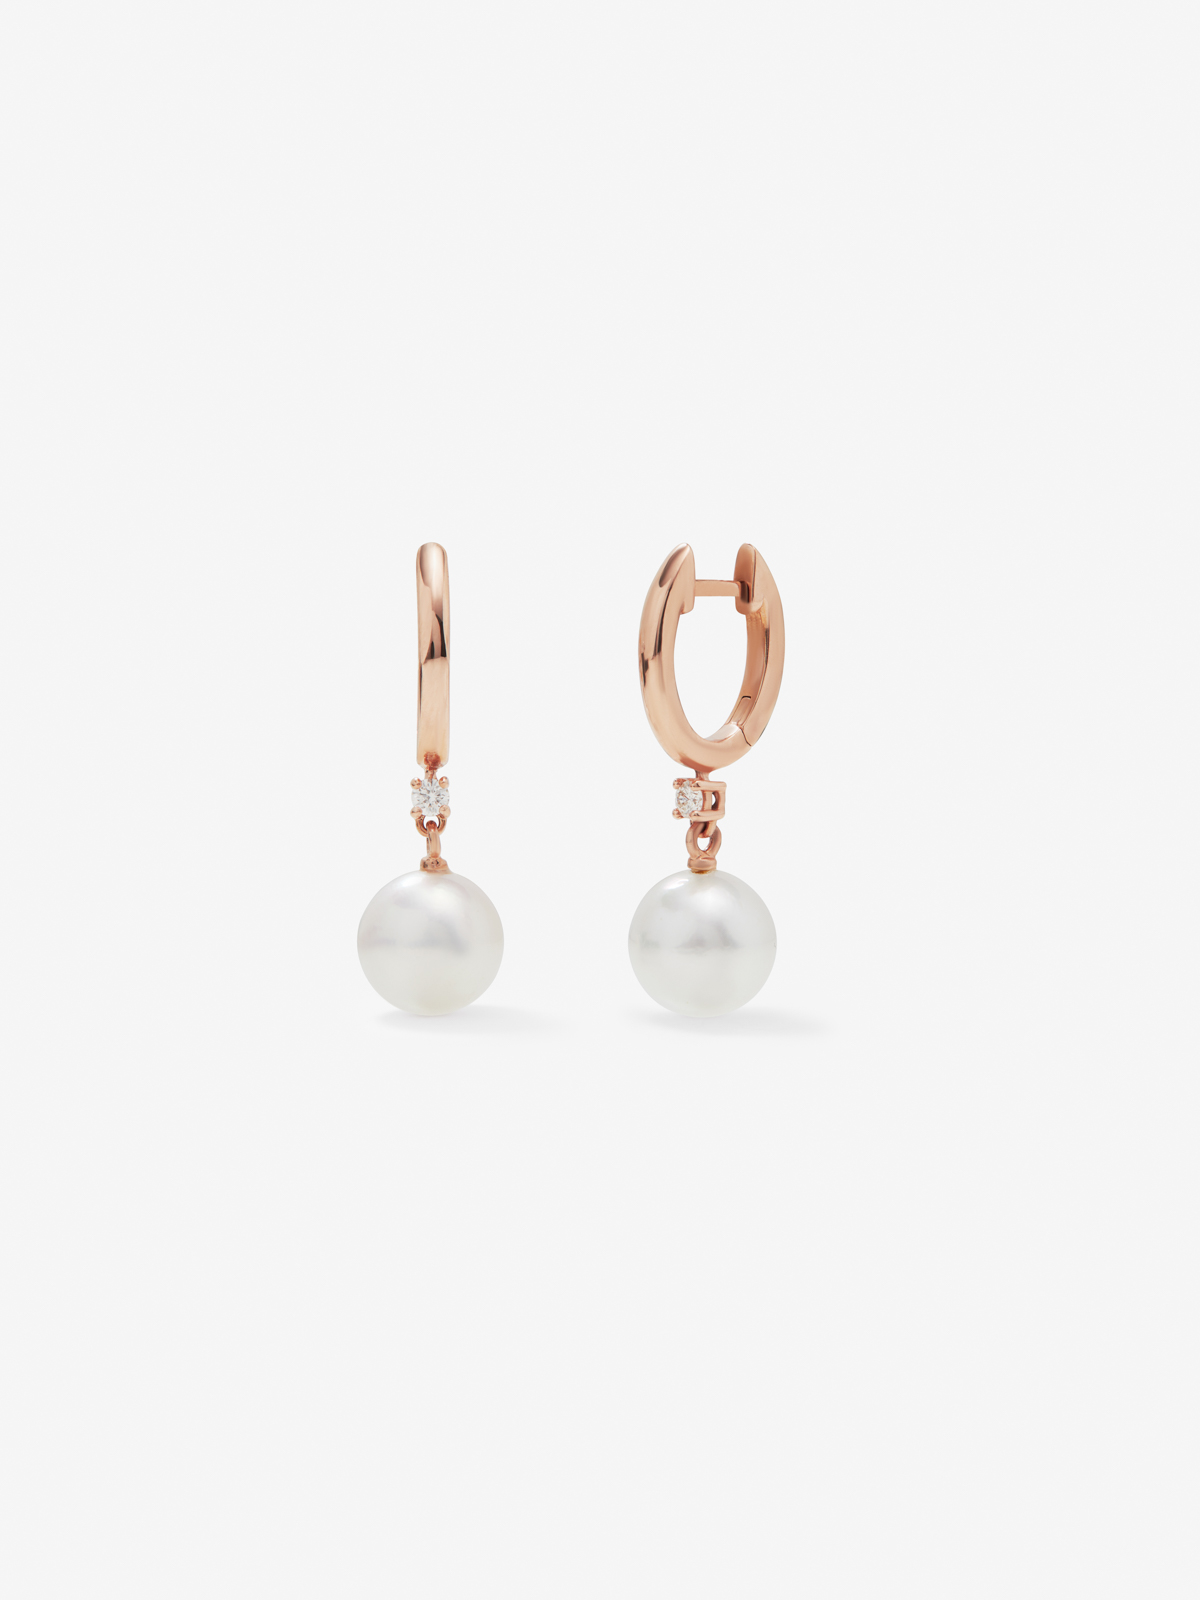 18k rose gold hoop earring with 8.5mm Australian pearl and diamond.